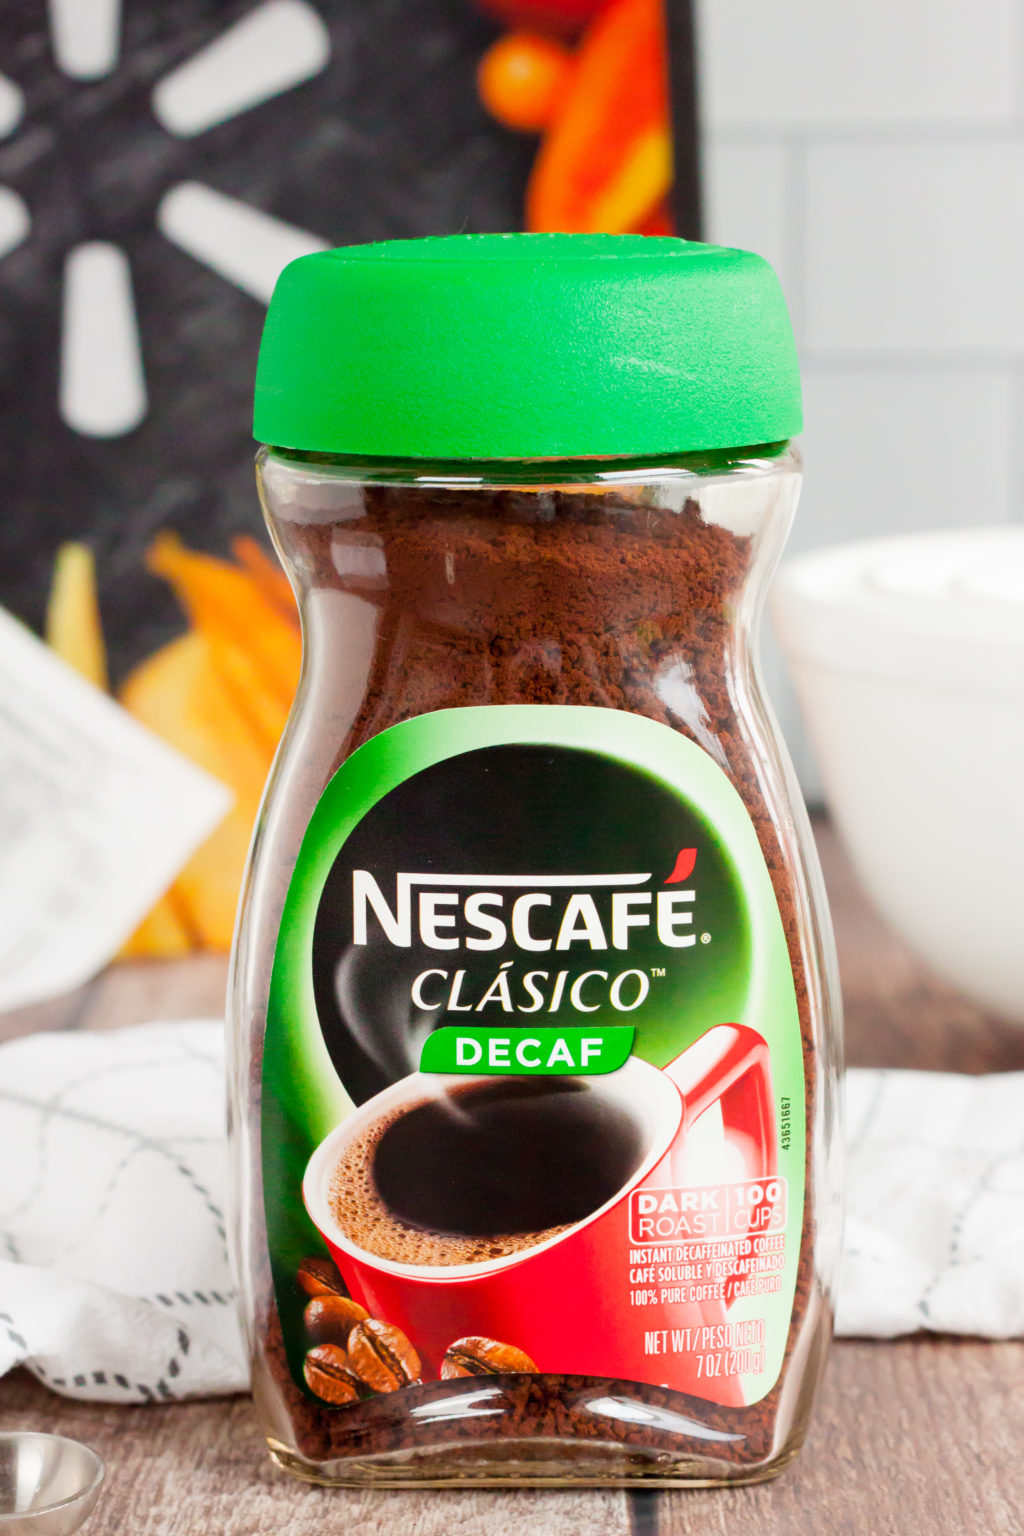 Close up of Nescafe Clasico coffee, Walmart bag and receipt are in the back.